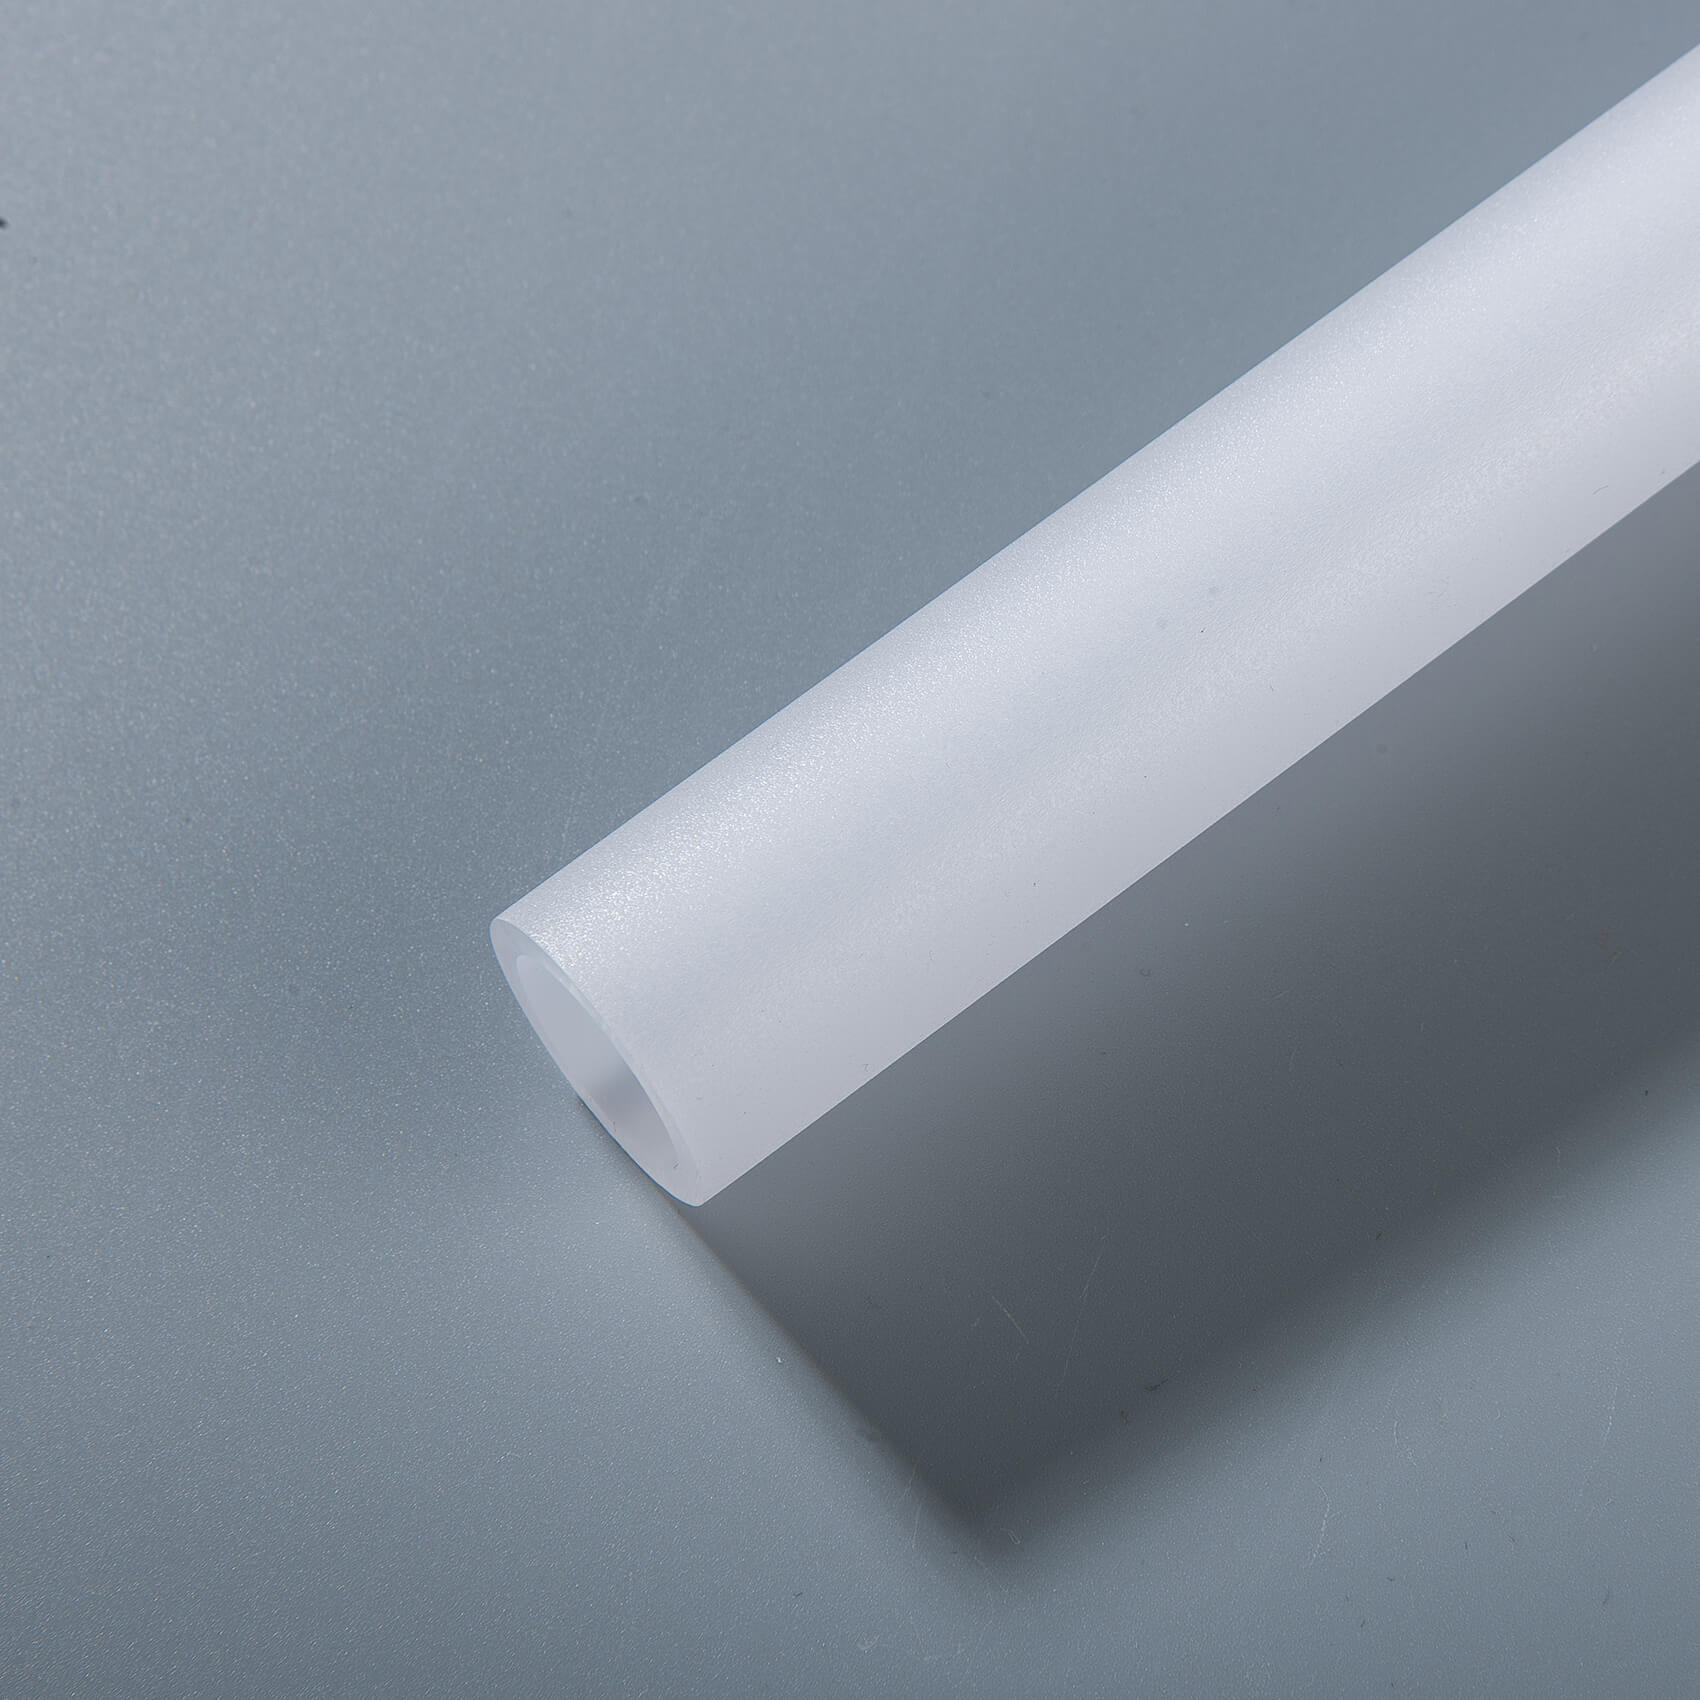 Mingshi extruded frosted acrylic tube (1)